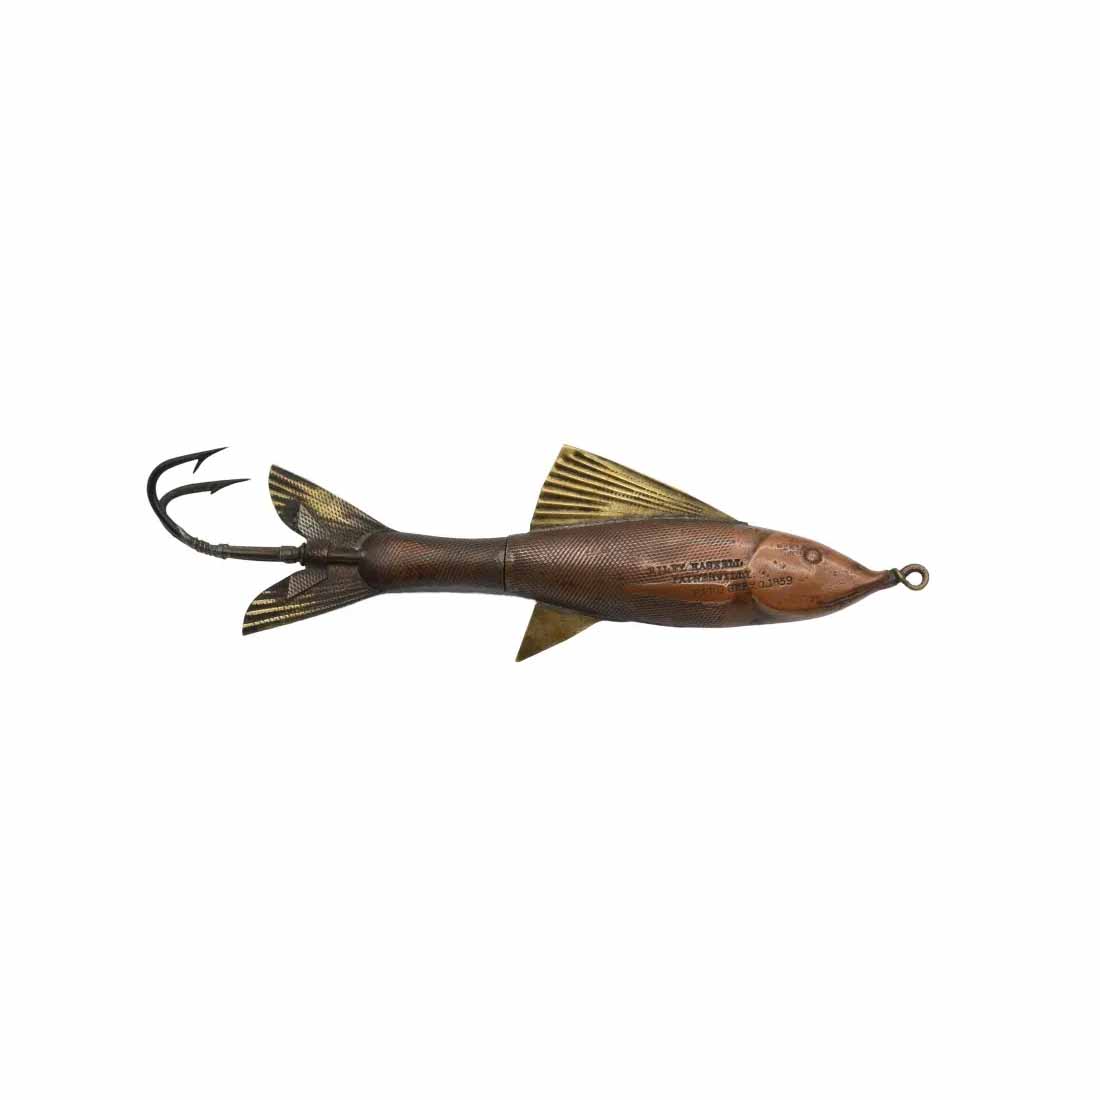 Haskell Minnow lure, which sold for $37,000 ($45,510 with buyer’s premium) at Blanchard's.